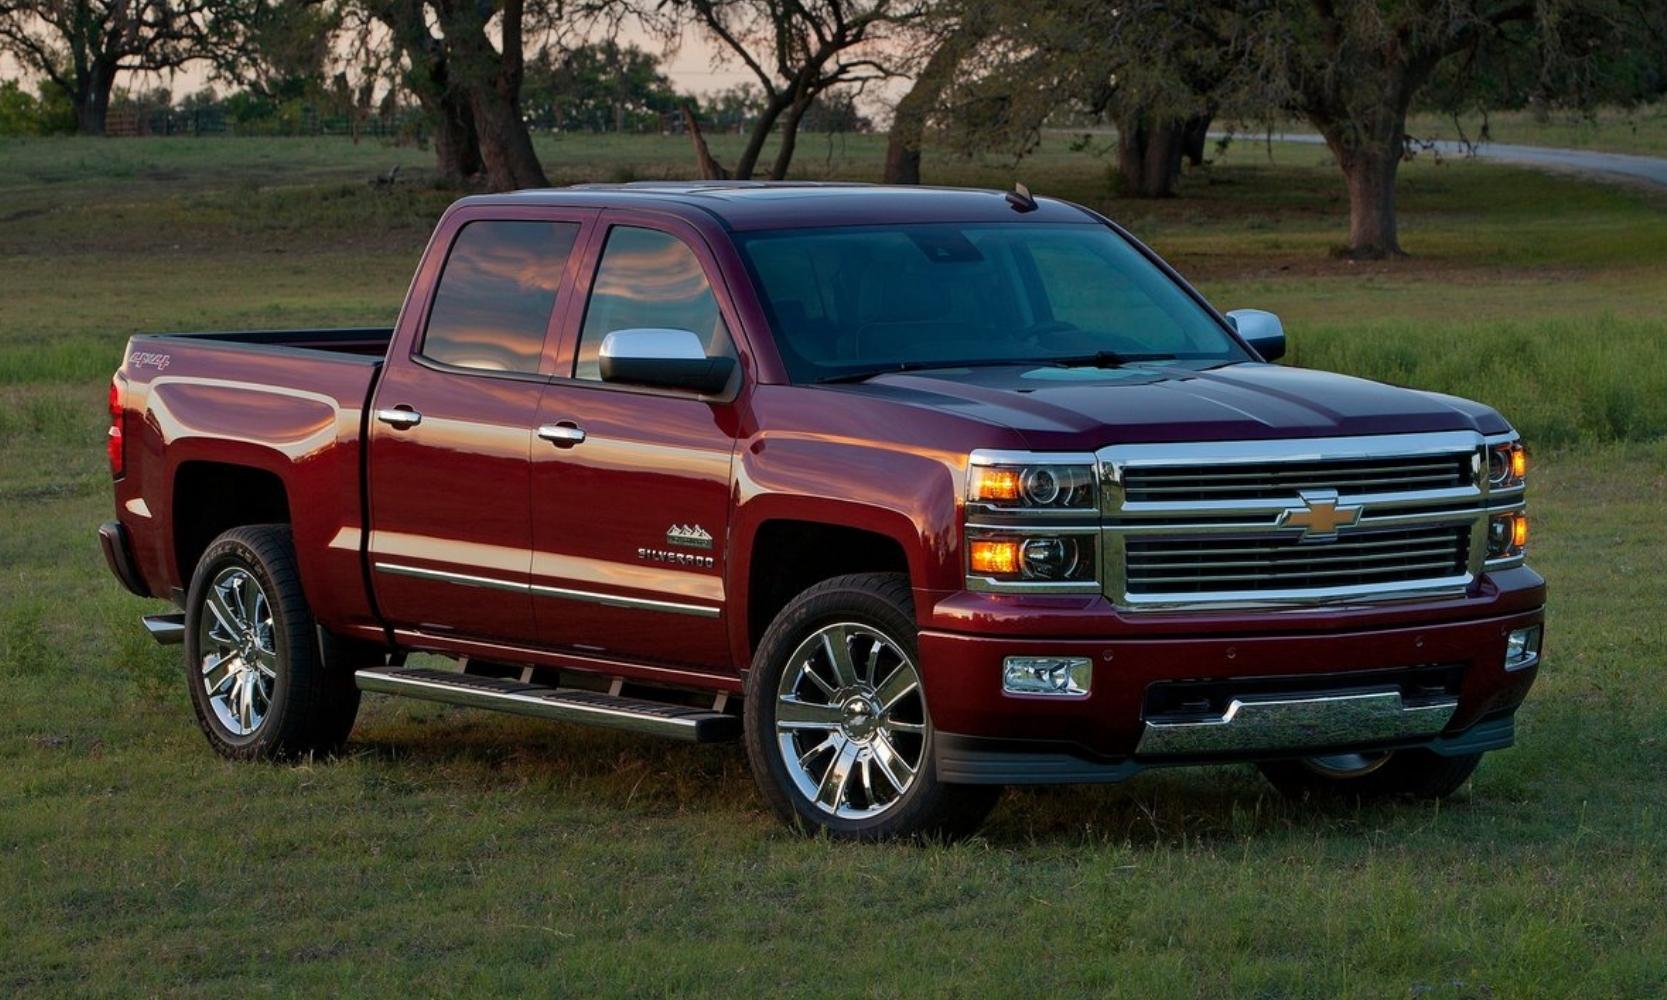 Used 2015 Chevy Silverado 1500 High Country in burgundy red exterior color